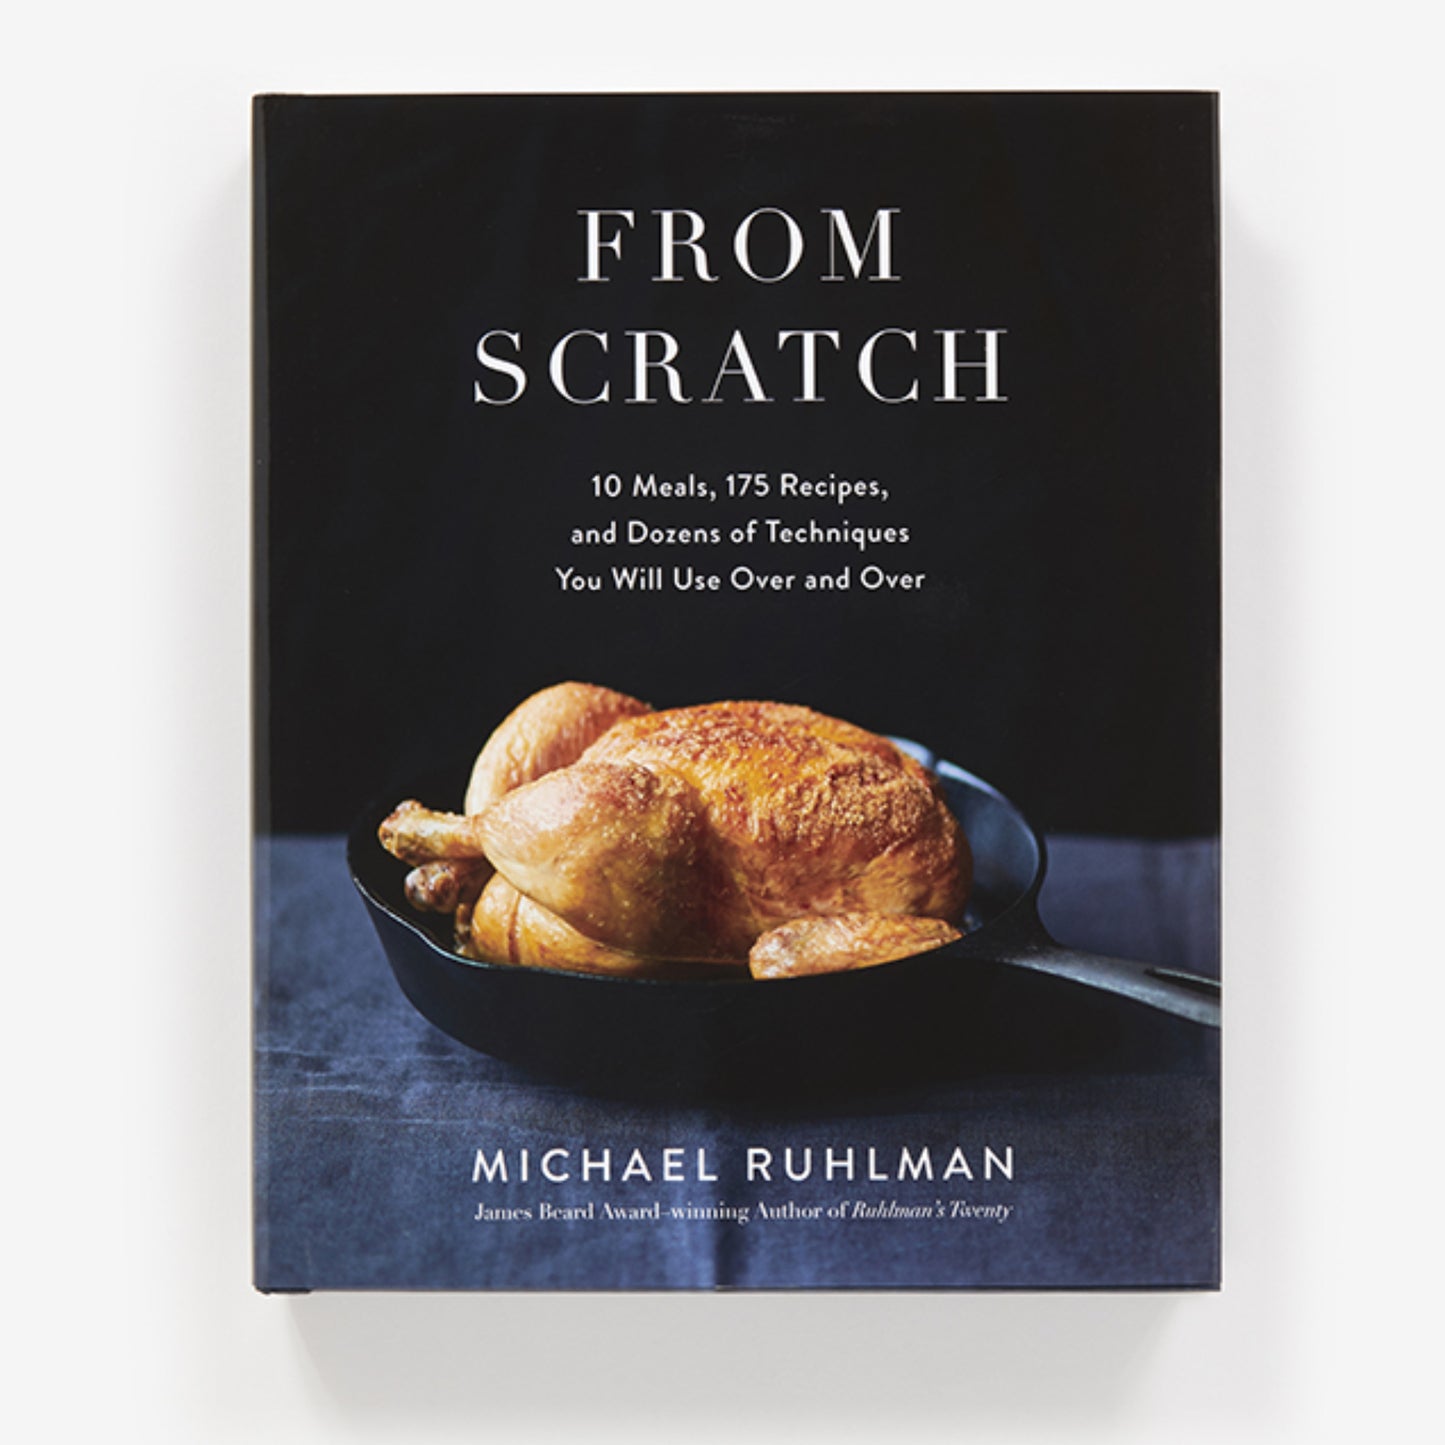 From Scratch (Hardcover)